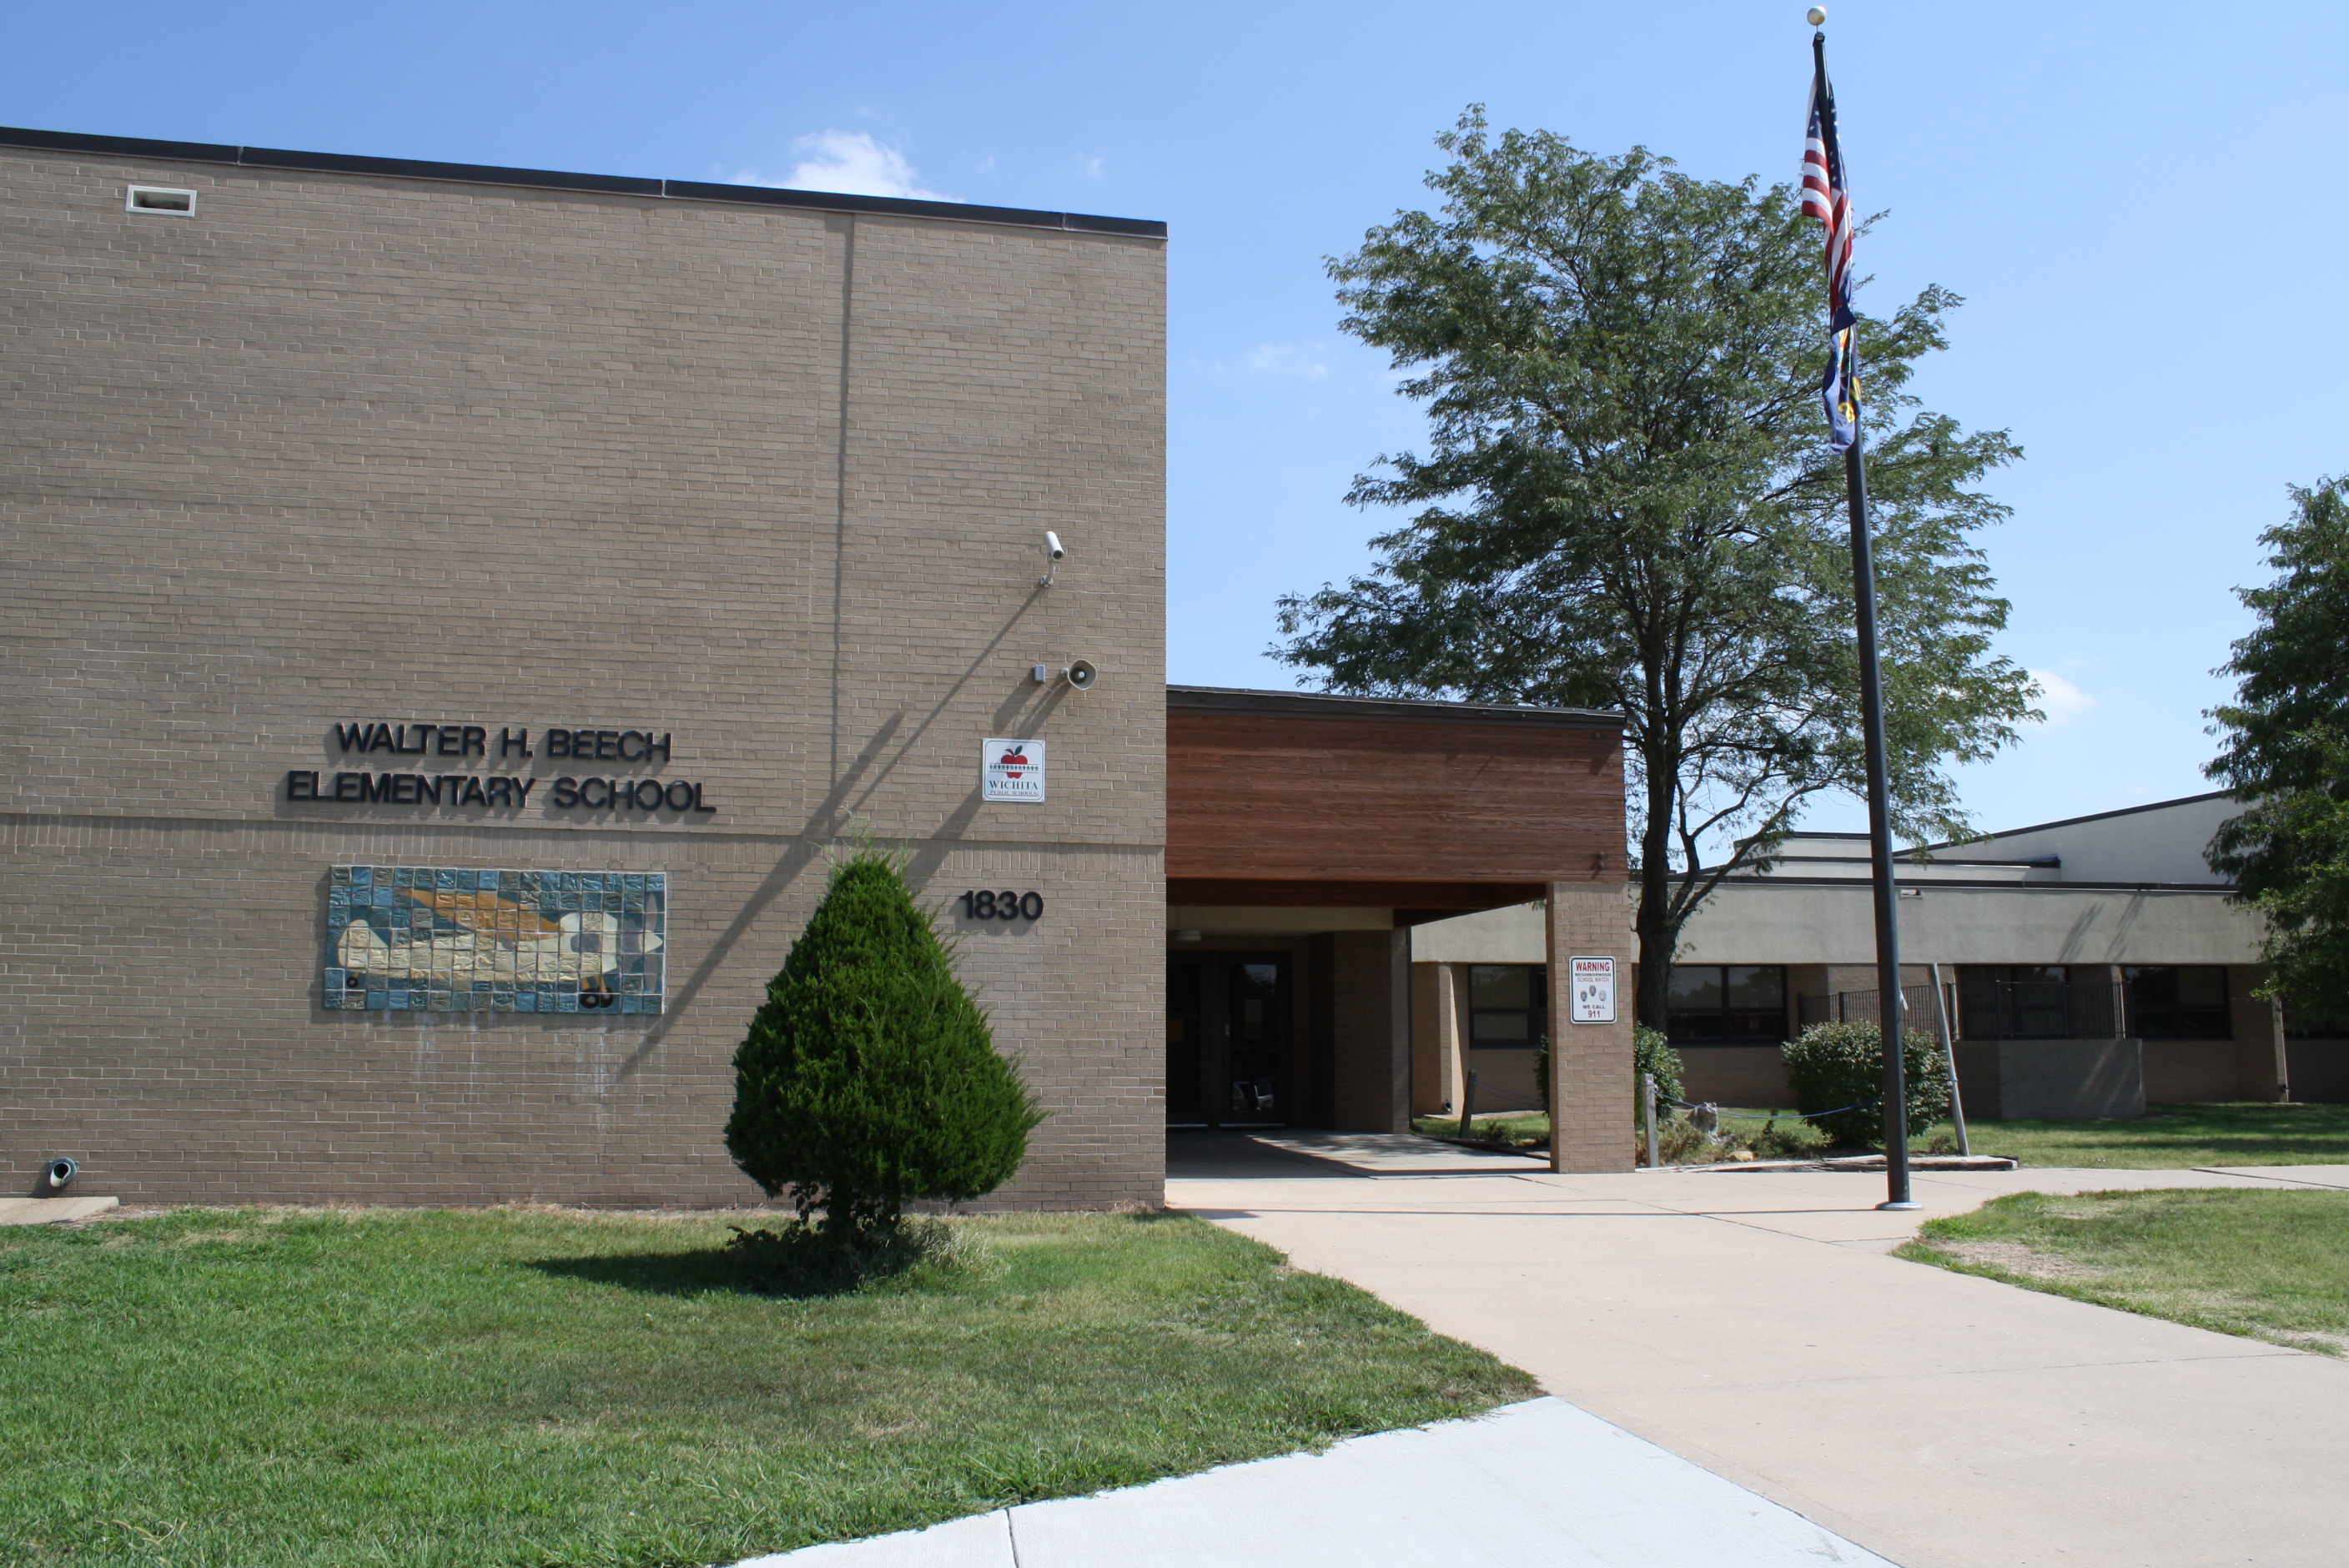 Image of the front of Beech Elementary School